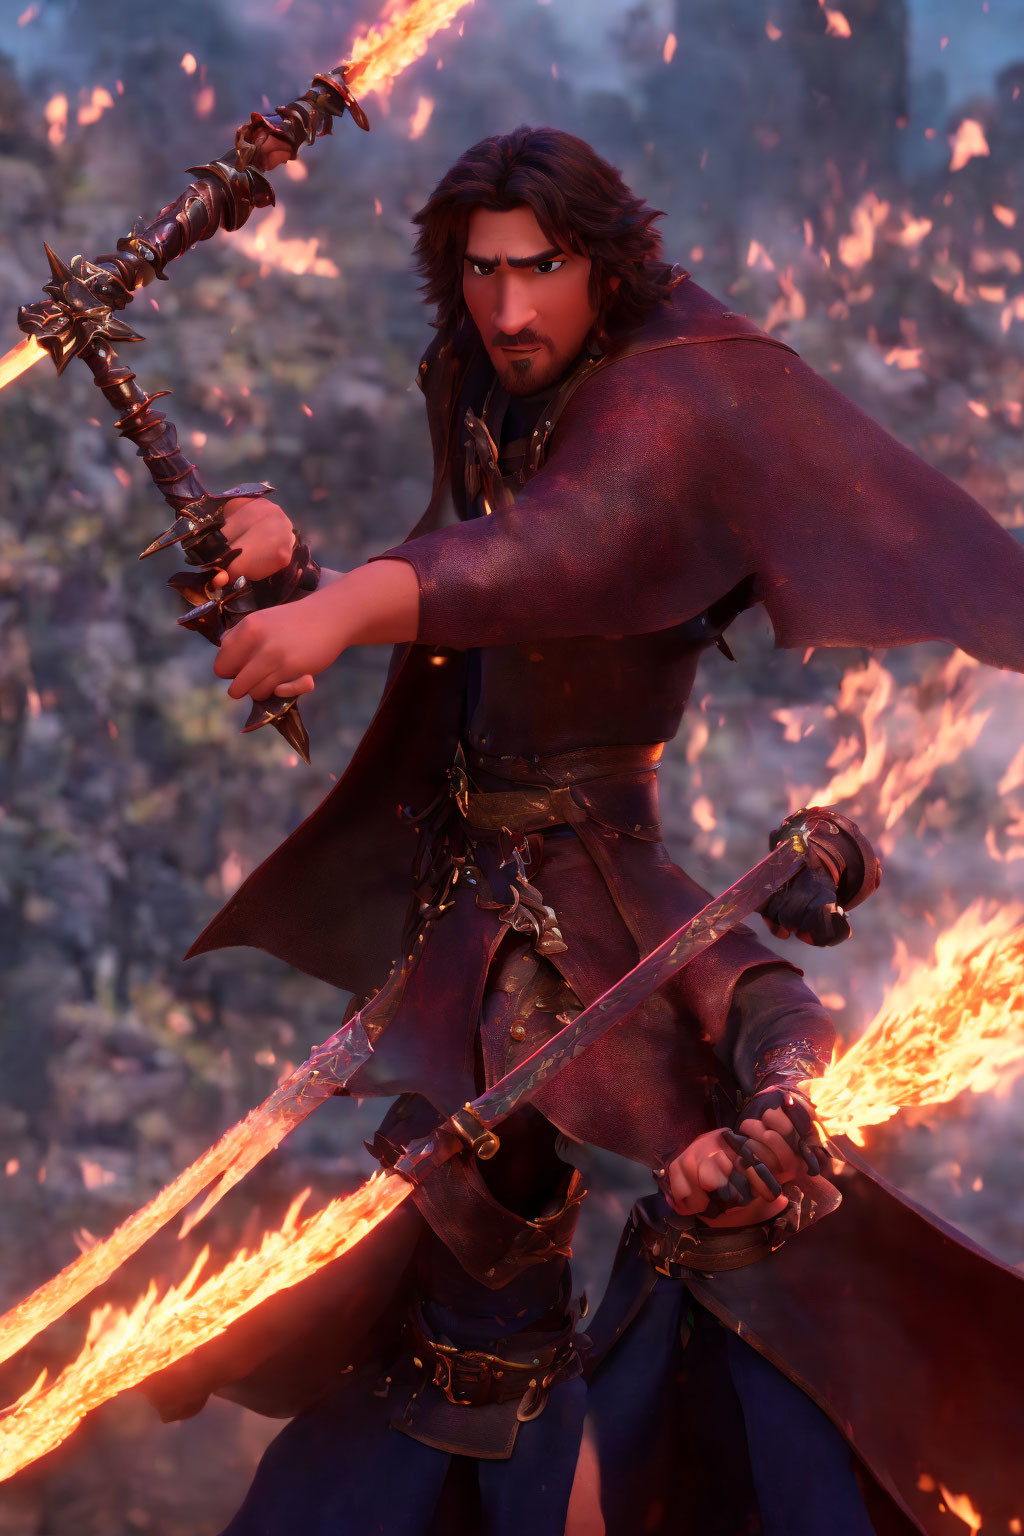 Warrior with flaming sword and mace in red cape amidst fiery backdrop